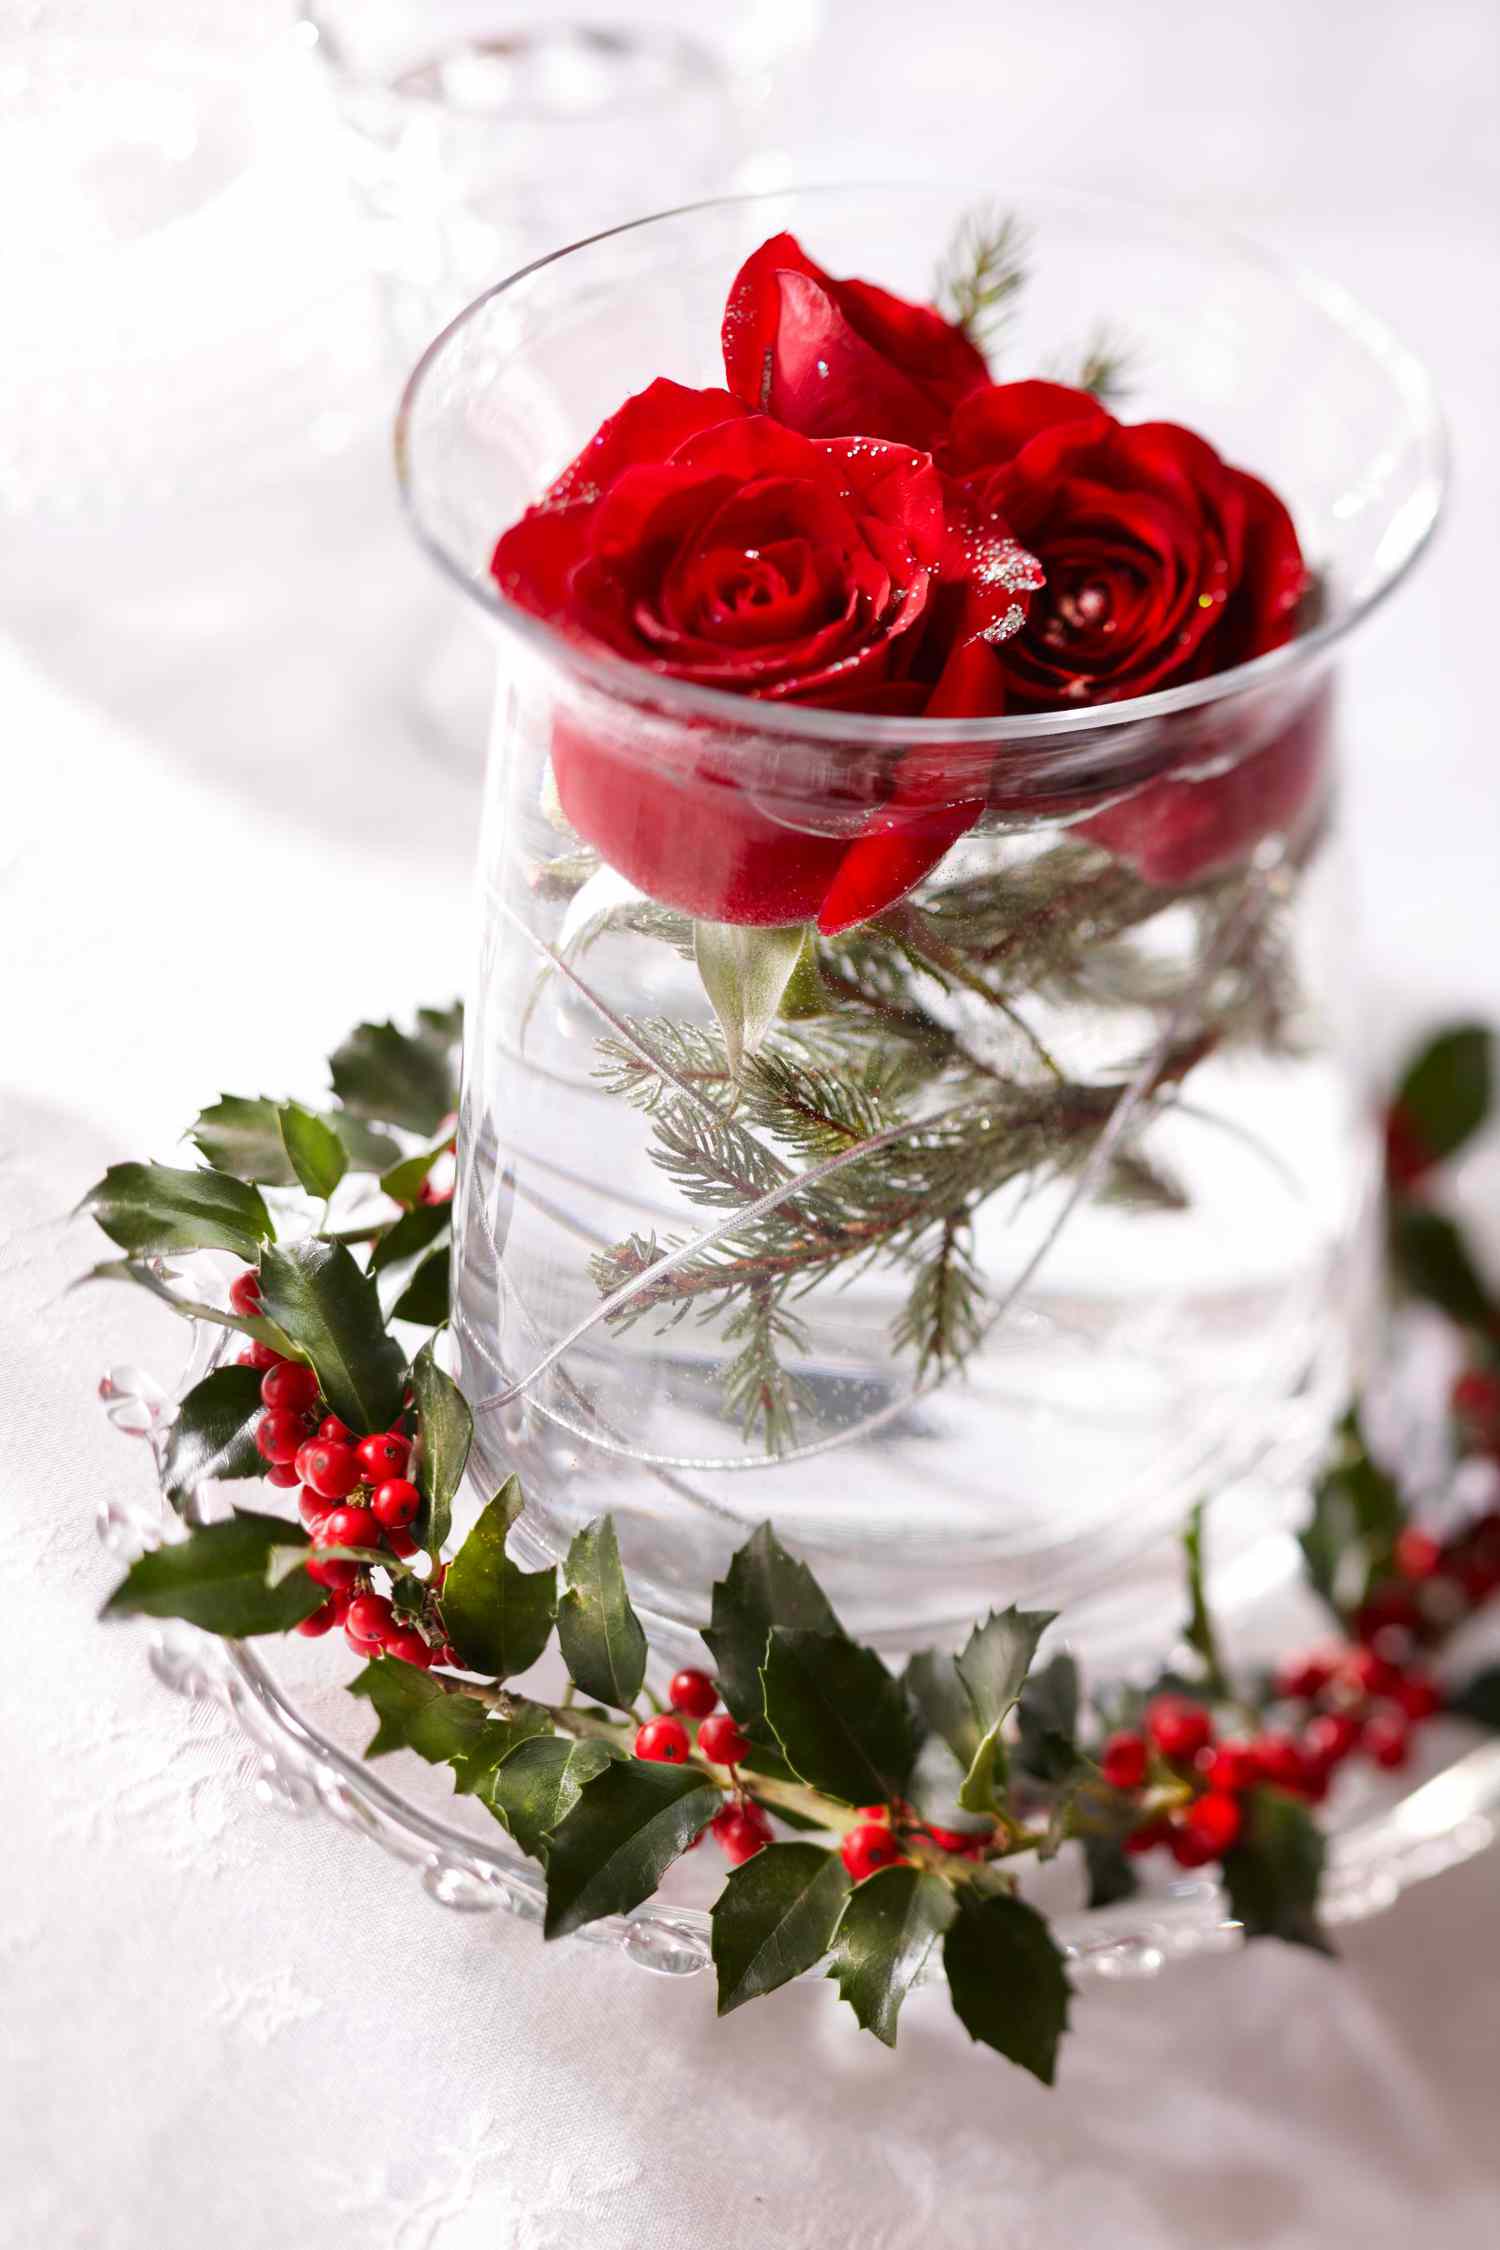 Christmas centerpiece ideas: rose and holly